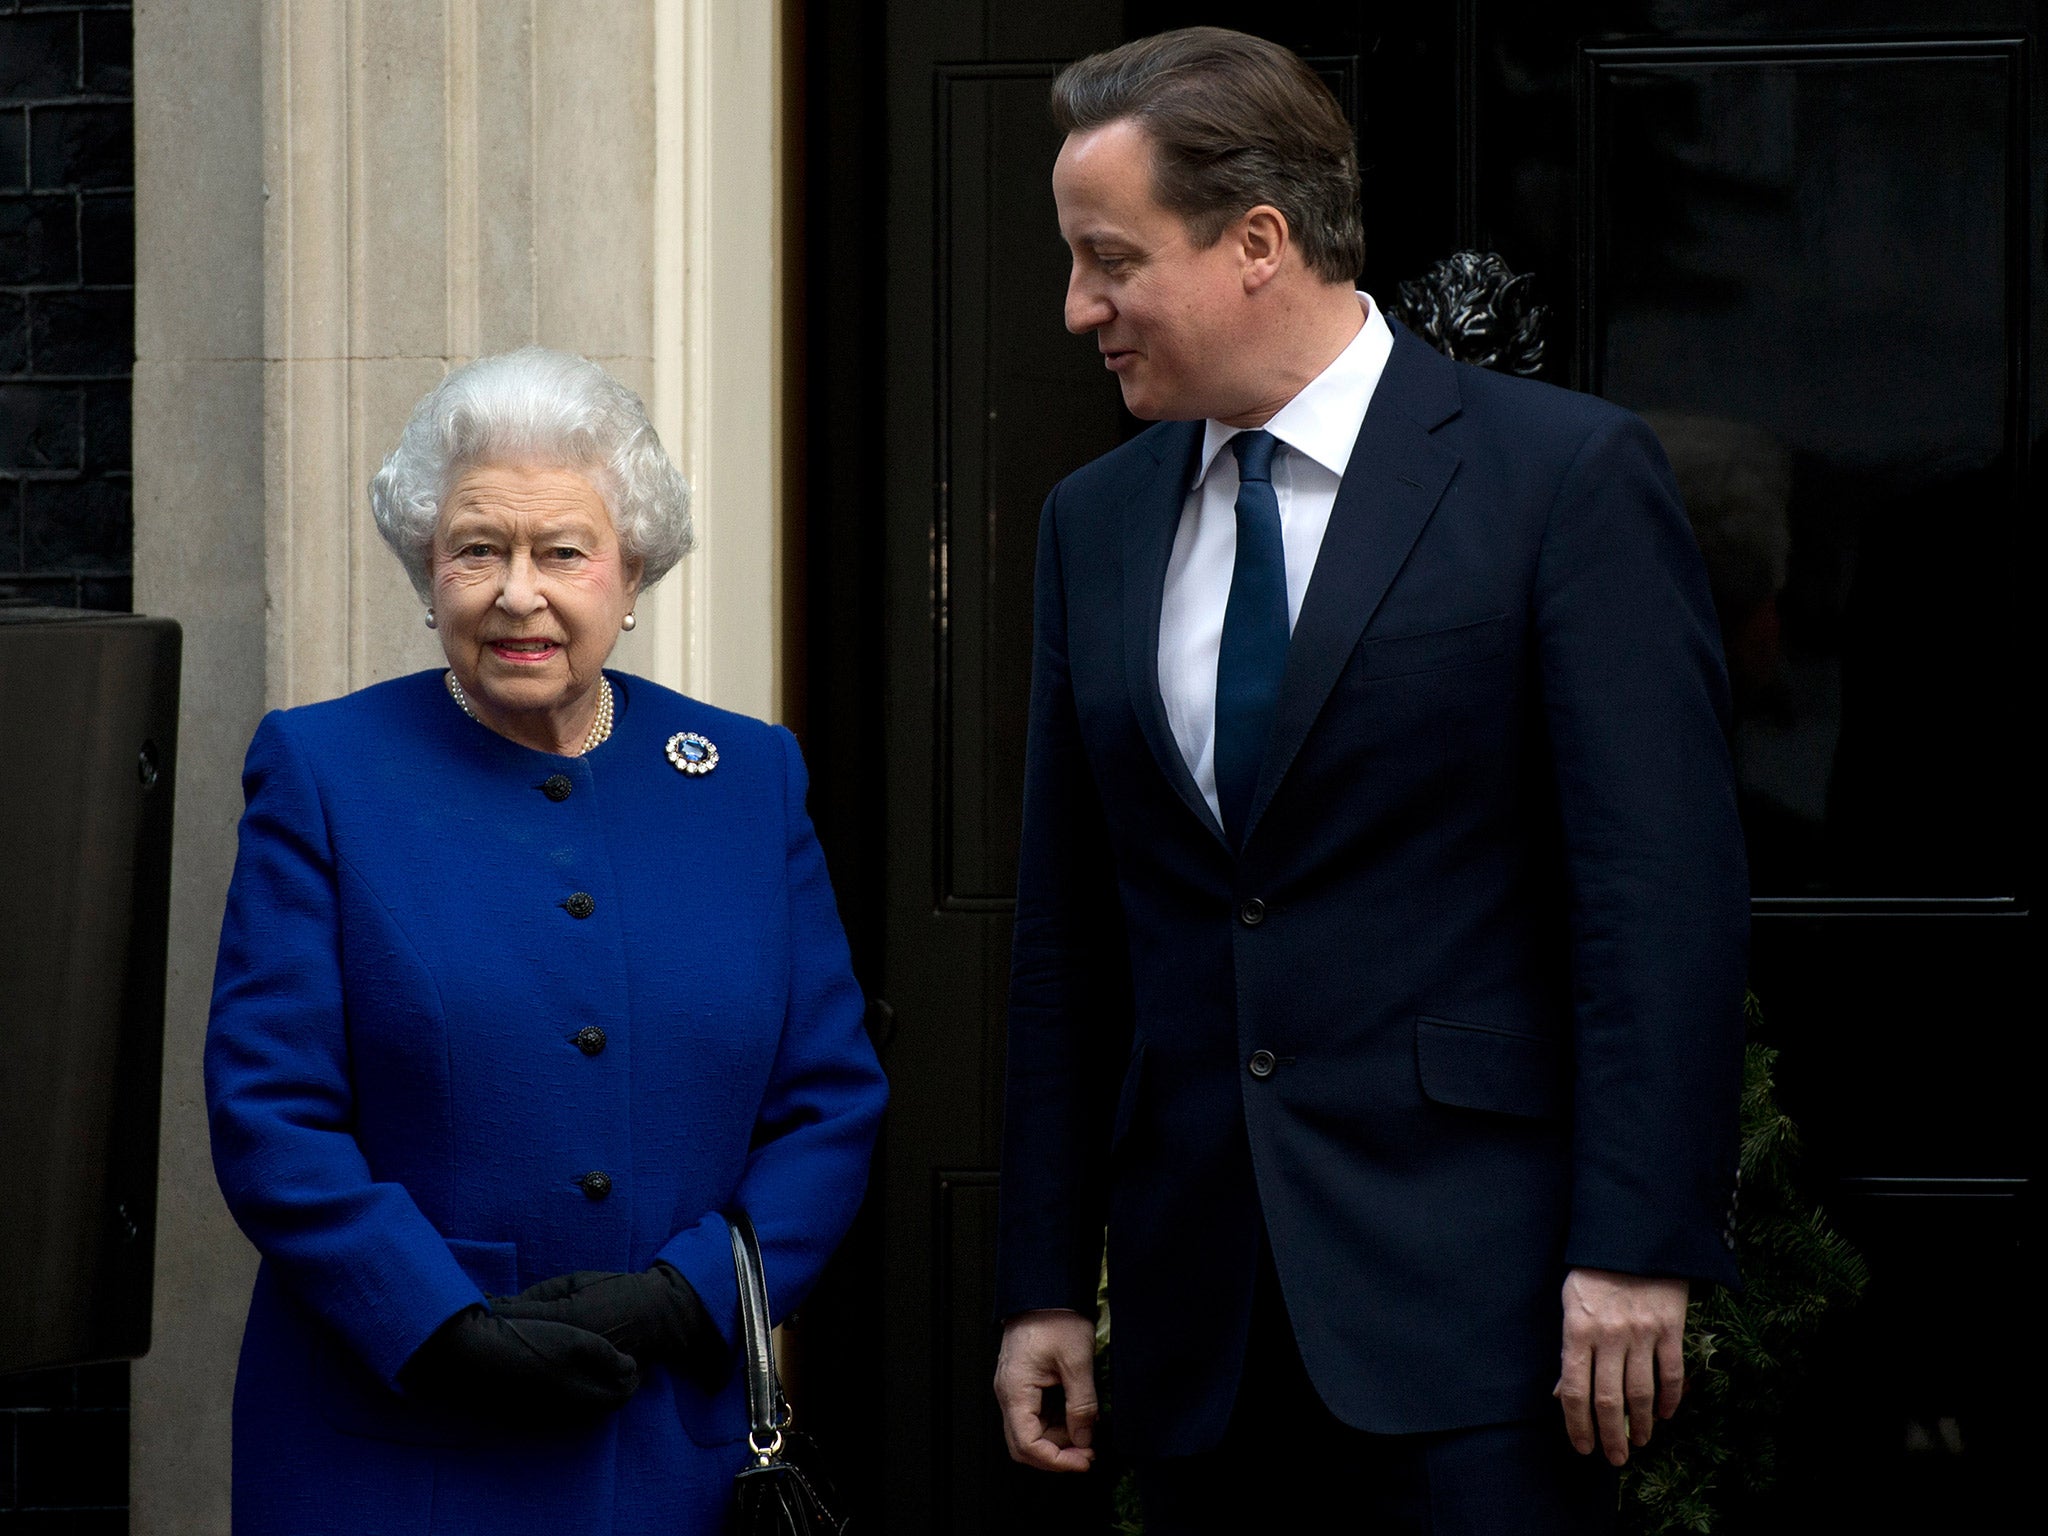 It is possible neither Ed Miliband nor David Cameron, pictured with the Queen, could be in a position to form a government after the election